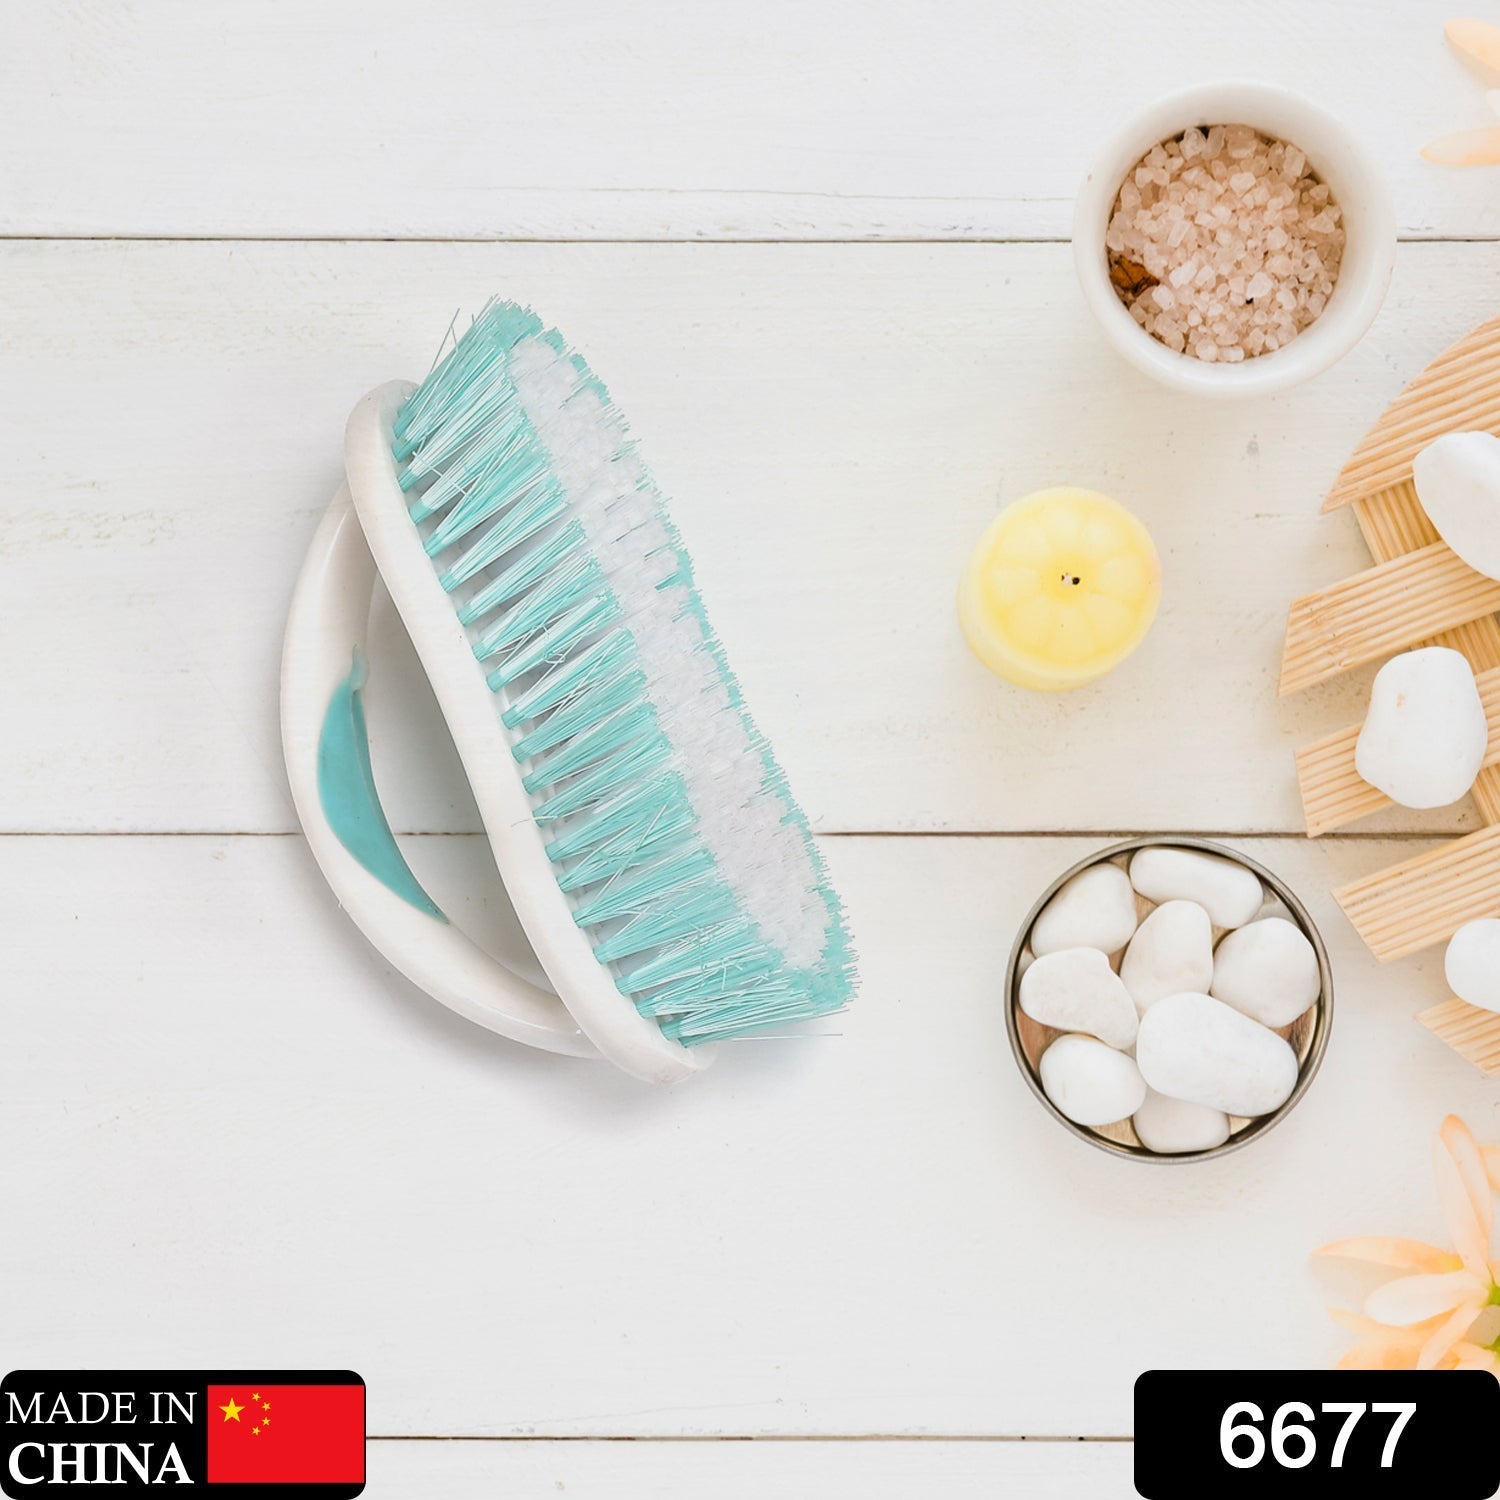 6677 Multipurpose Durable Cleaning Brush with handle for Clothes Laundry Floor Tiles at Home Kitchen Sink, Wet and Dry wash Cloth Spotting Washing Scrubbing Brush. 